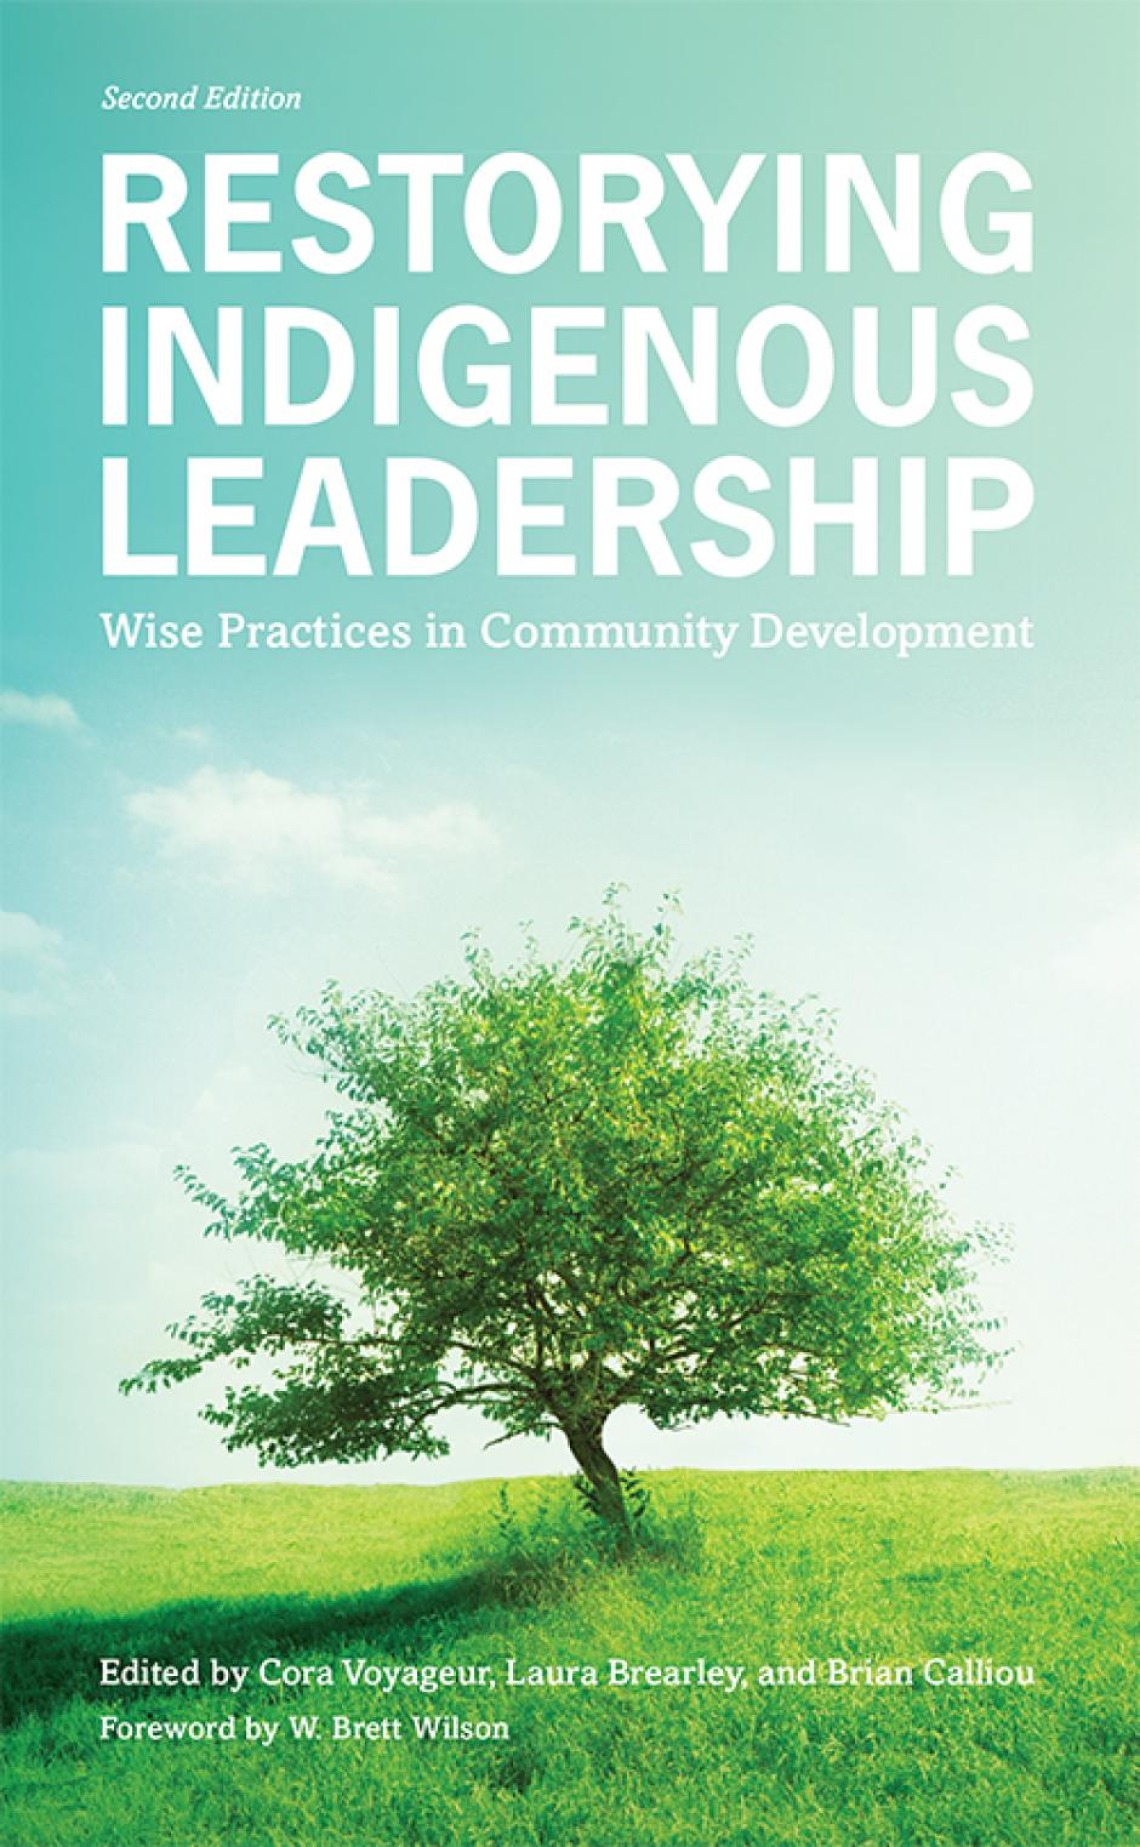 Jorgensen, Miriam. 2014. "Four Contemporary Tensions in Indigenous Nation Building: Challenges for Leadership." In Restorying Indigenous Leadership: Wise Practices in Community Development